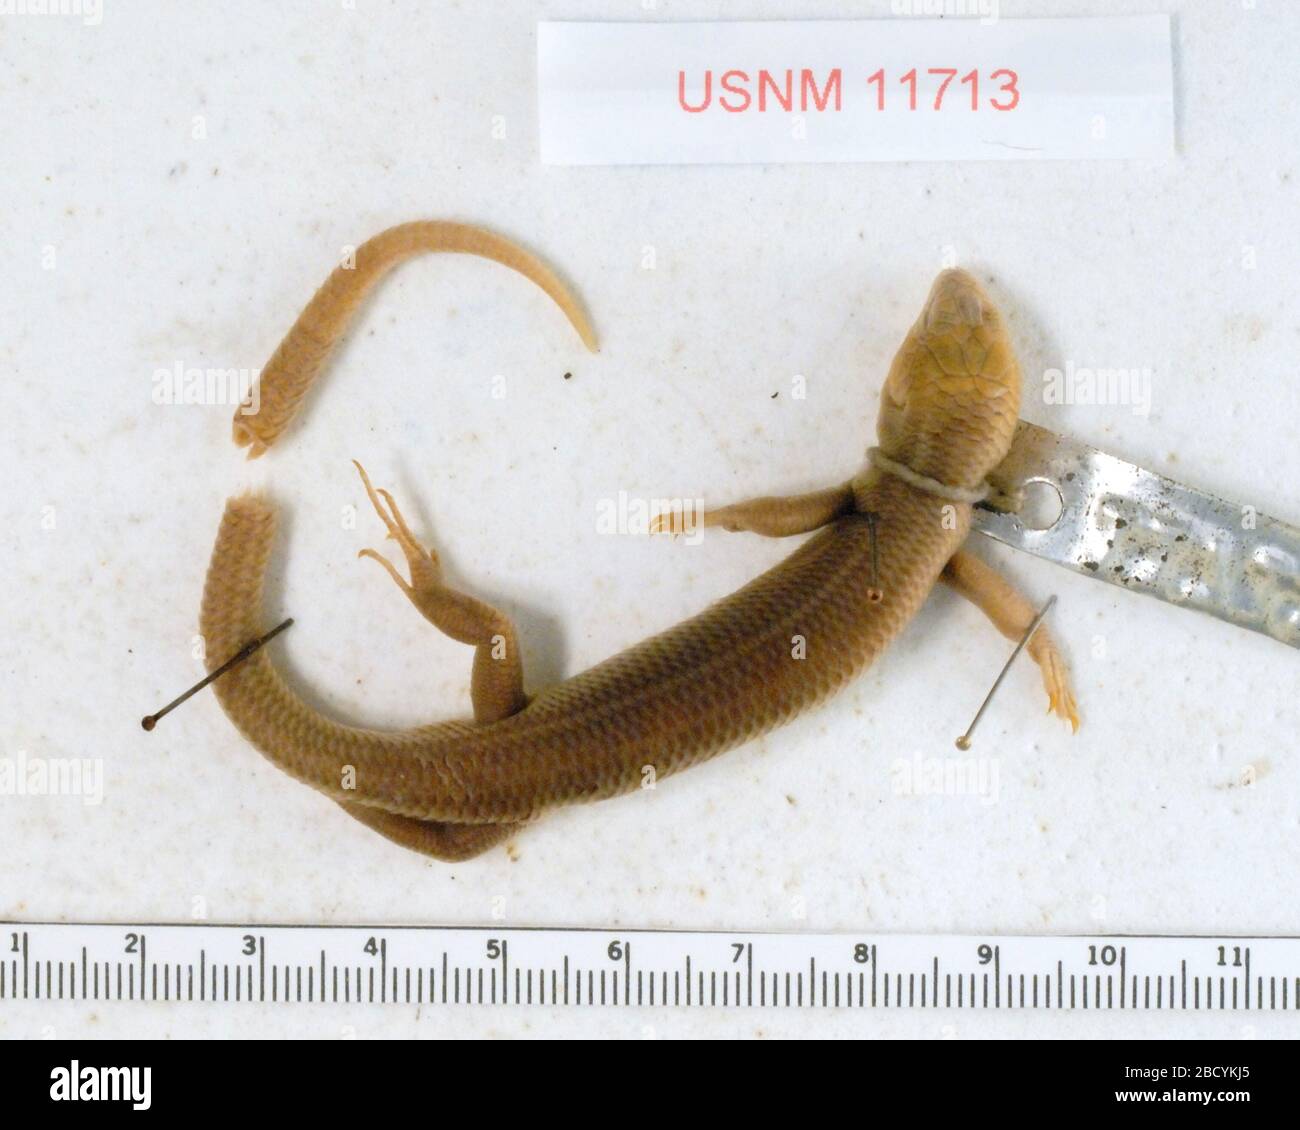 Plestiodon marginatus. Three (of eight) of the projecting muscle bundles were removed from the exposed end of the loose (broken-off) tail tip on 29 July 2011. Plestiodon marginatus Stock Photo